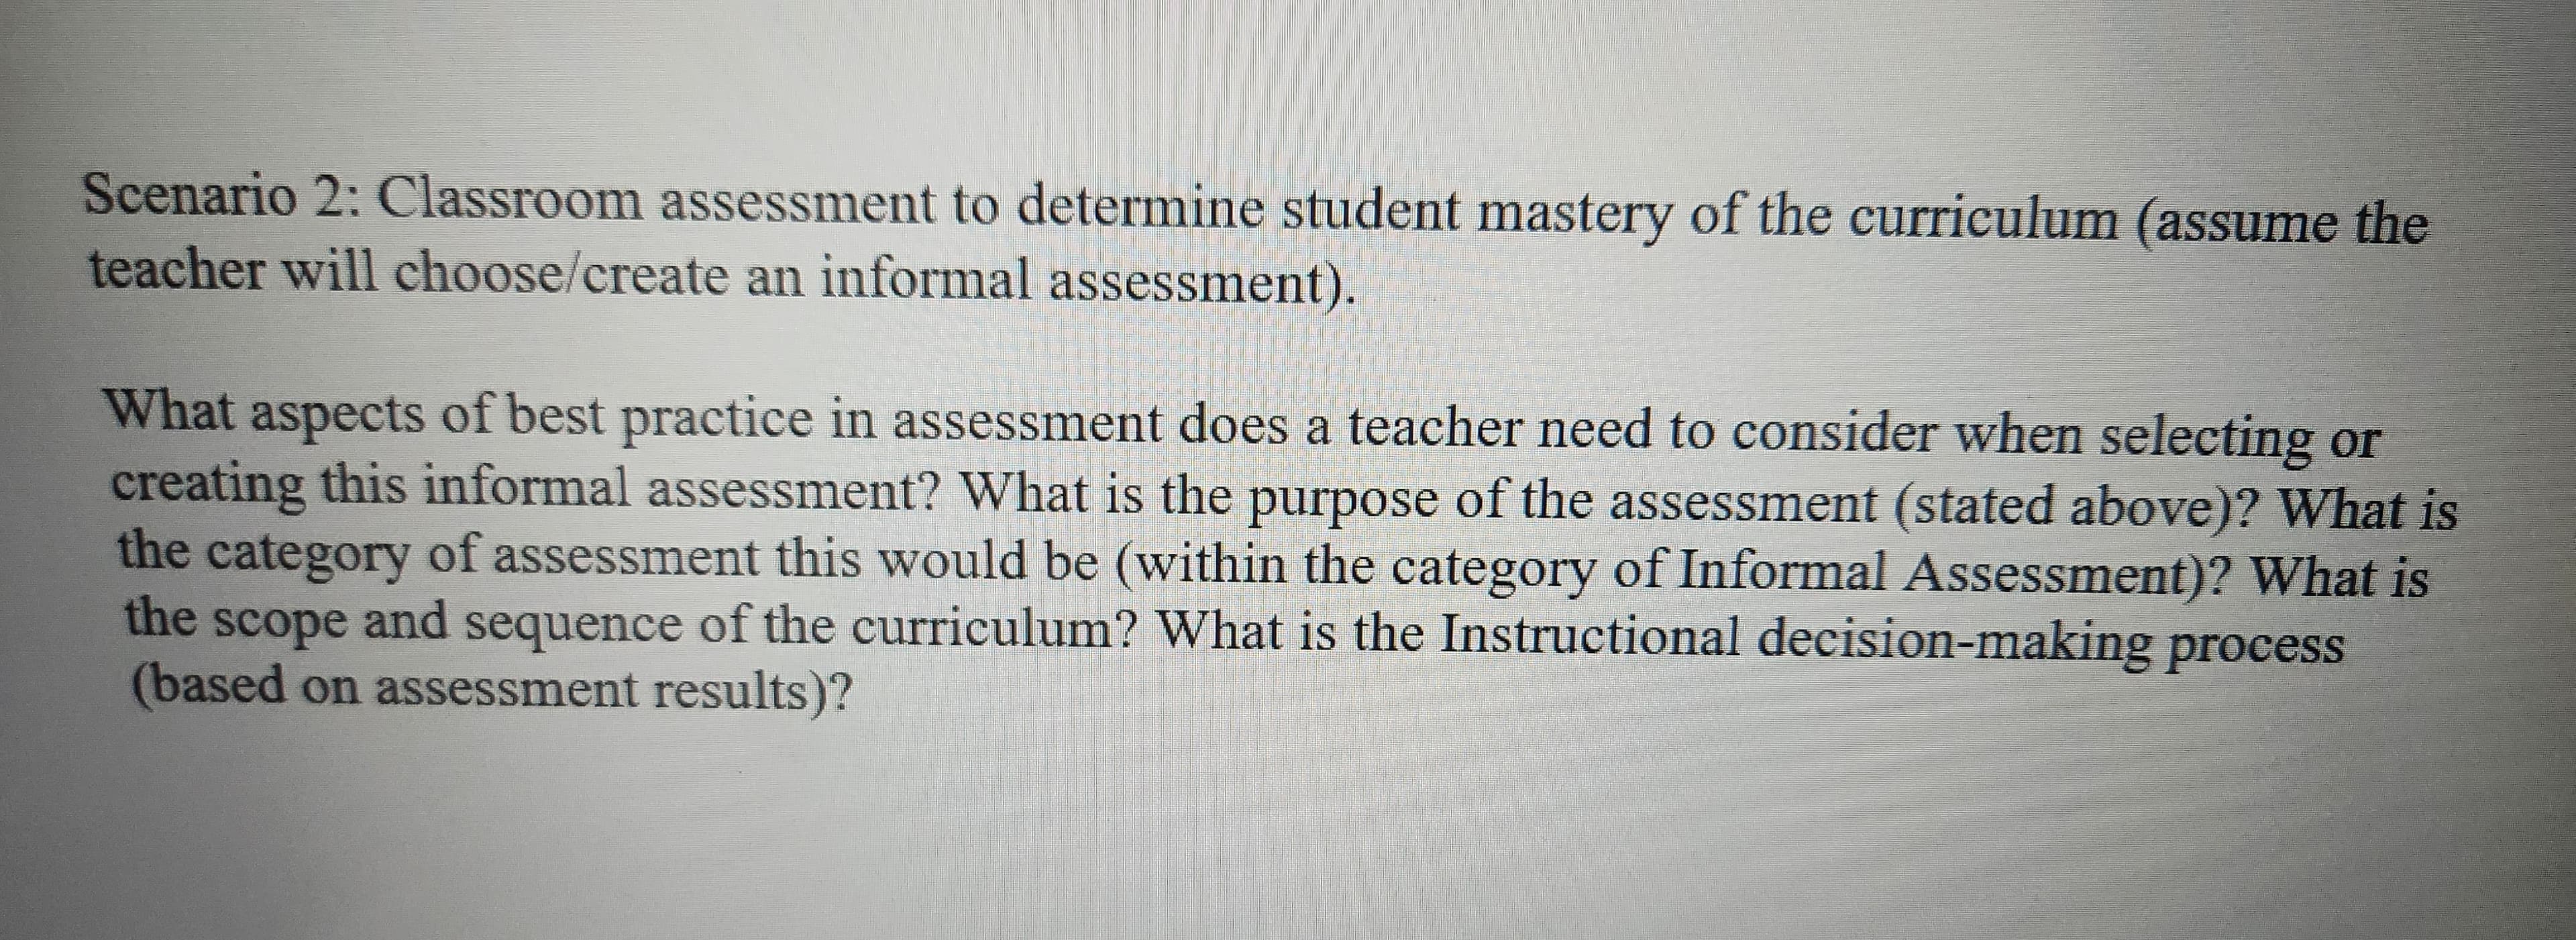 Scenario 2: Classroom assessment to determine student mastery of the curriculum (assume the
teacher will choose/create an informal assessment).
What aspects of best practice in assessment does a teacher need to consider when selecting or
creating this informal assessment? What is the purpose of the assessment (stated above)? What is
the category of assessment this would be (within the category of Informal Assessment)? What is
the scope and sequence of the curriculum? What is the Instructional decision-making process
(based on assessment results)?